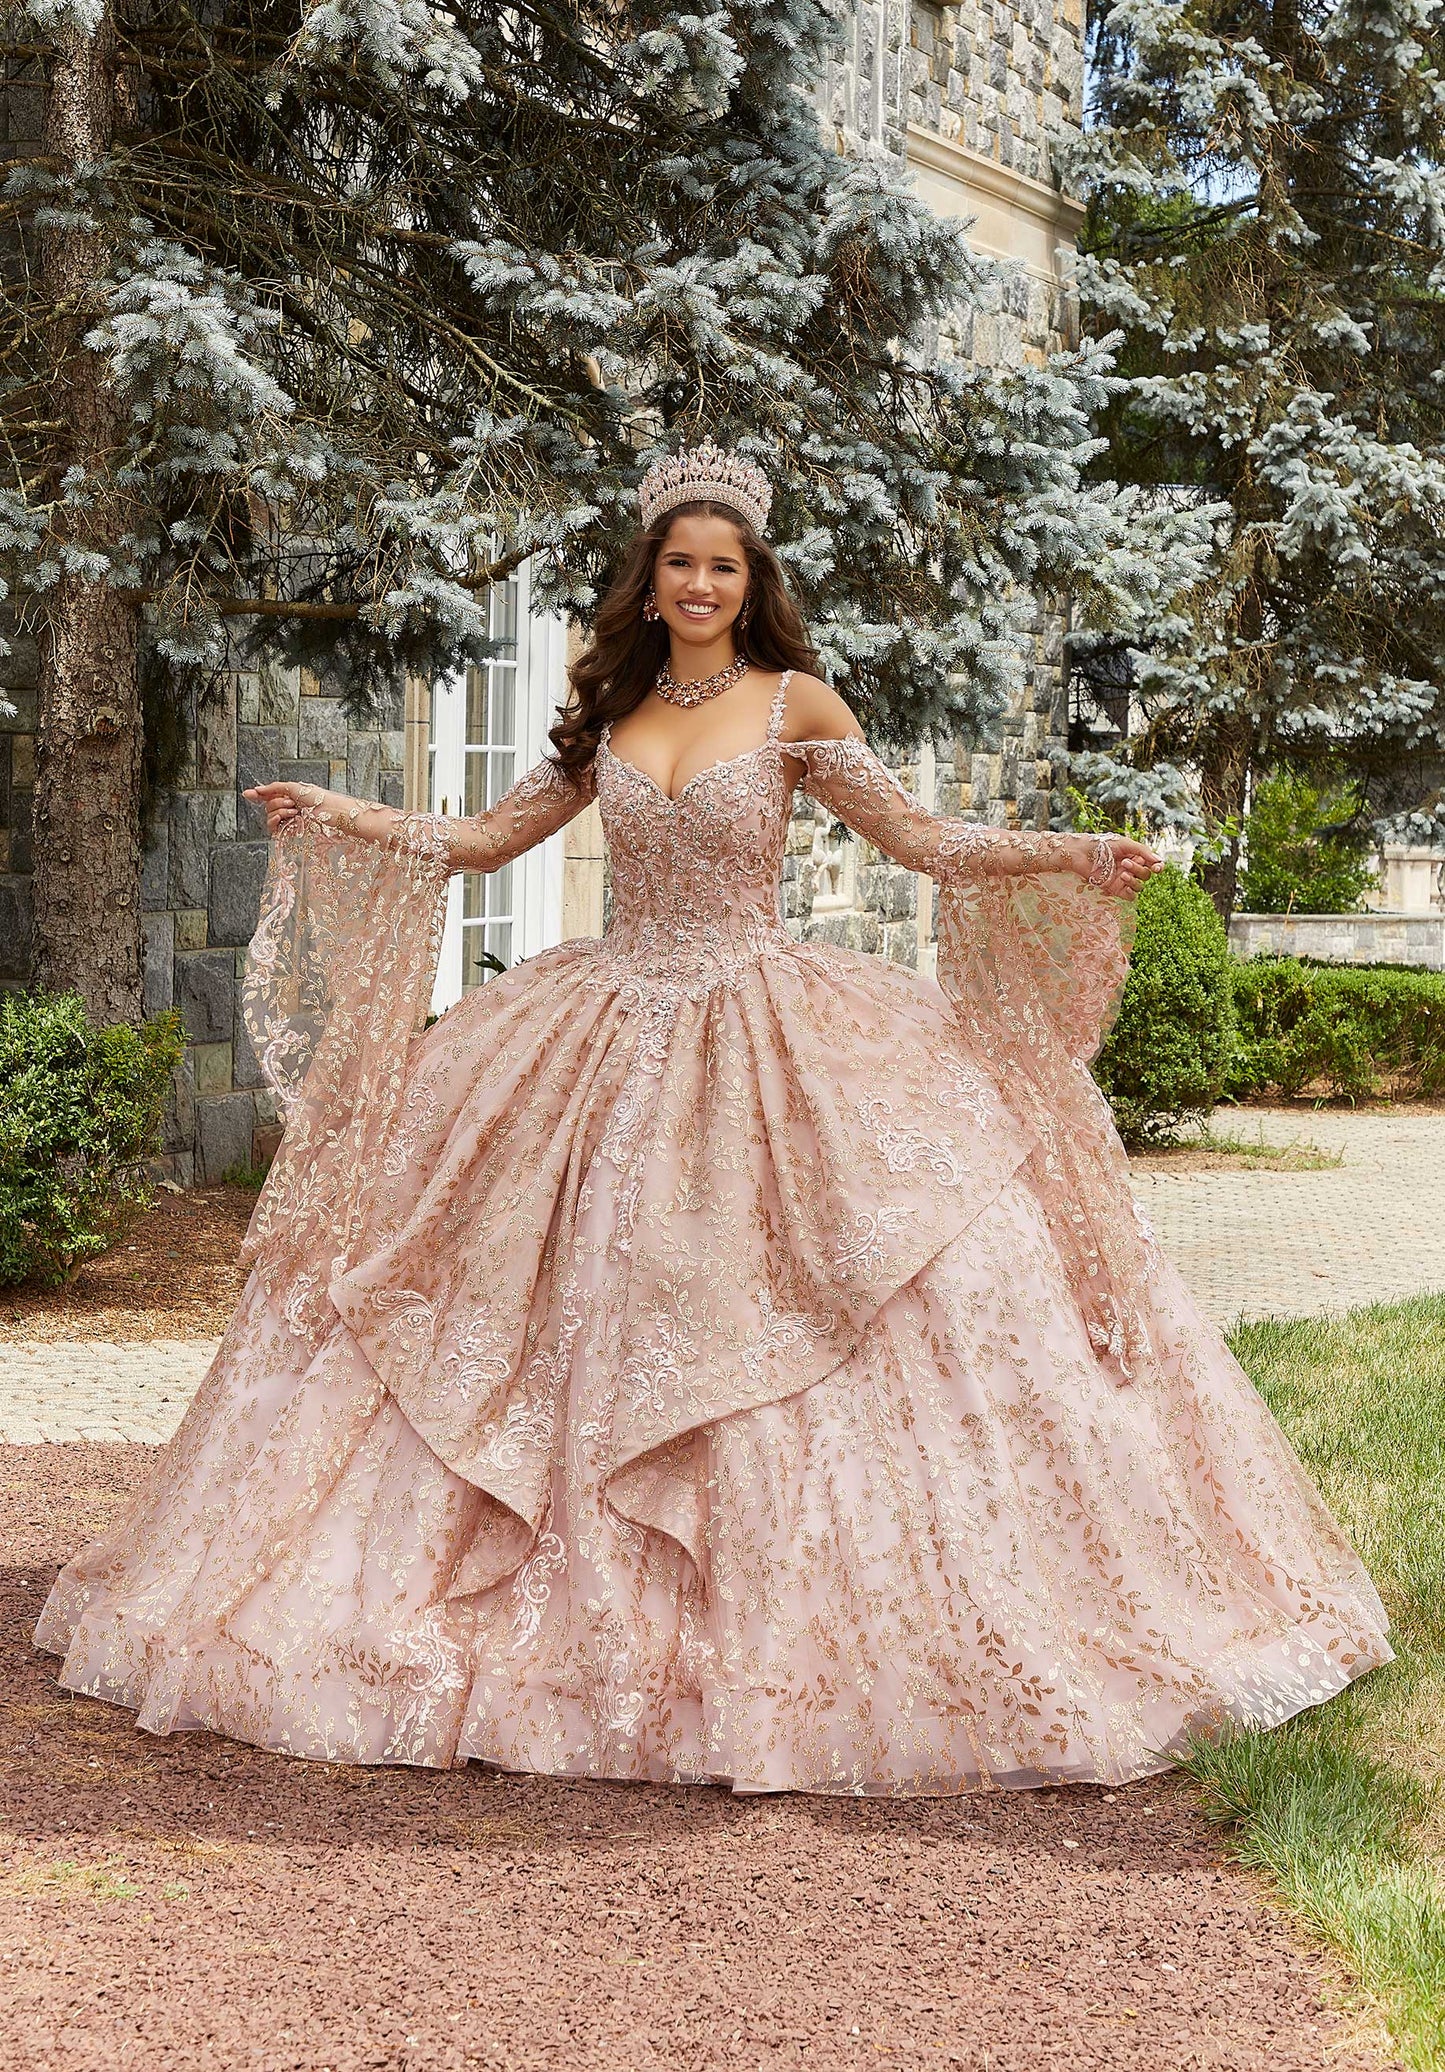 11299 | Rhinestone and Crystal Beaded Patterned Glitter Quinceañera Dress